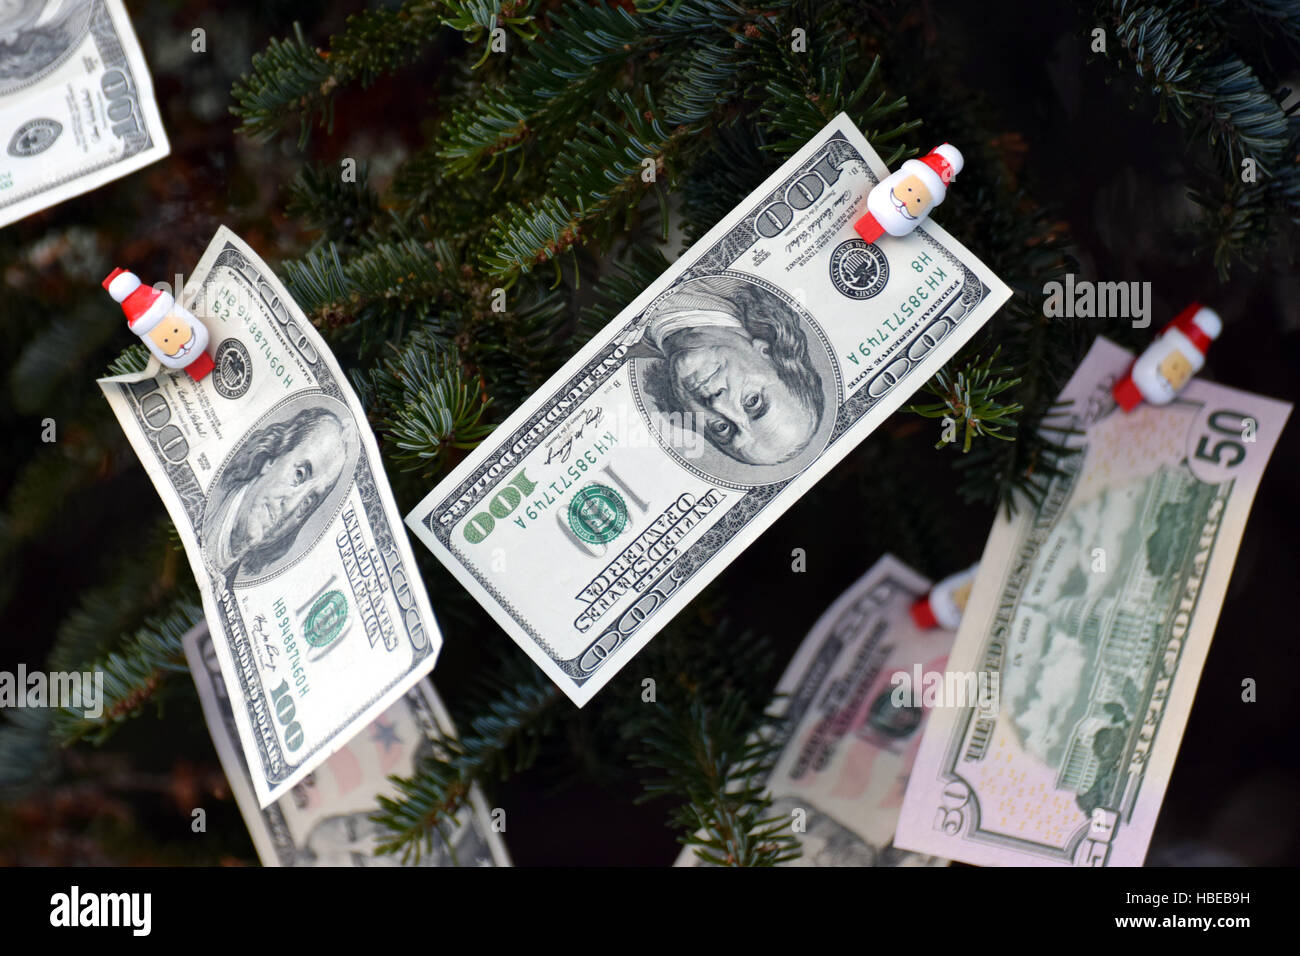 Money hanging in a Christmas tree. Stock Photo